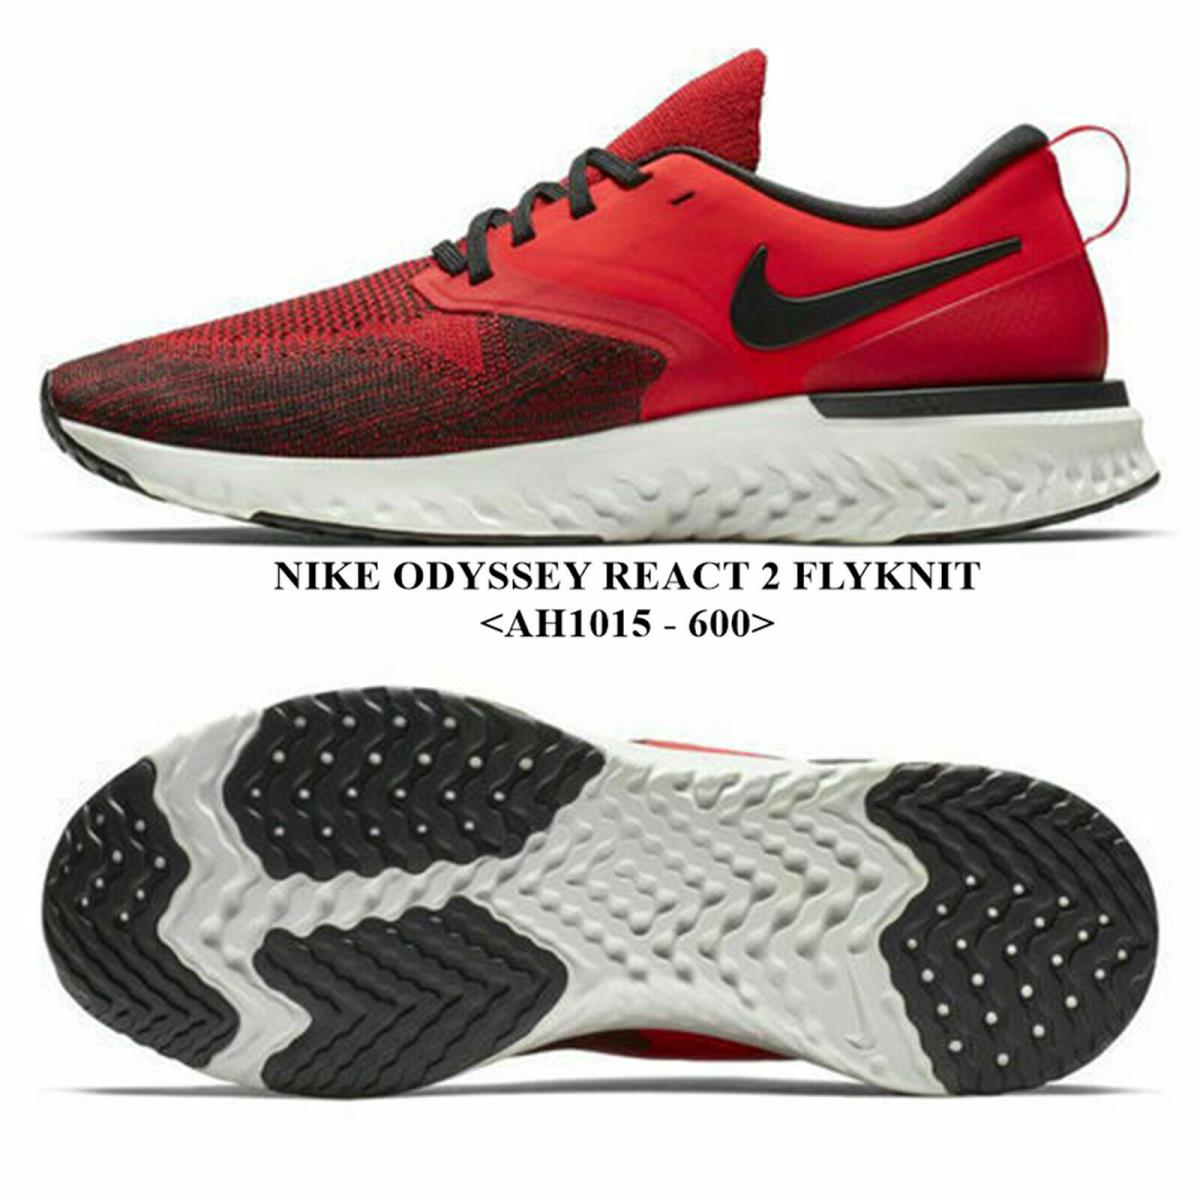 Nike Odyssey React 2 Flyknit <AH1015 - 600> Men`s Running Shoes.new with Box